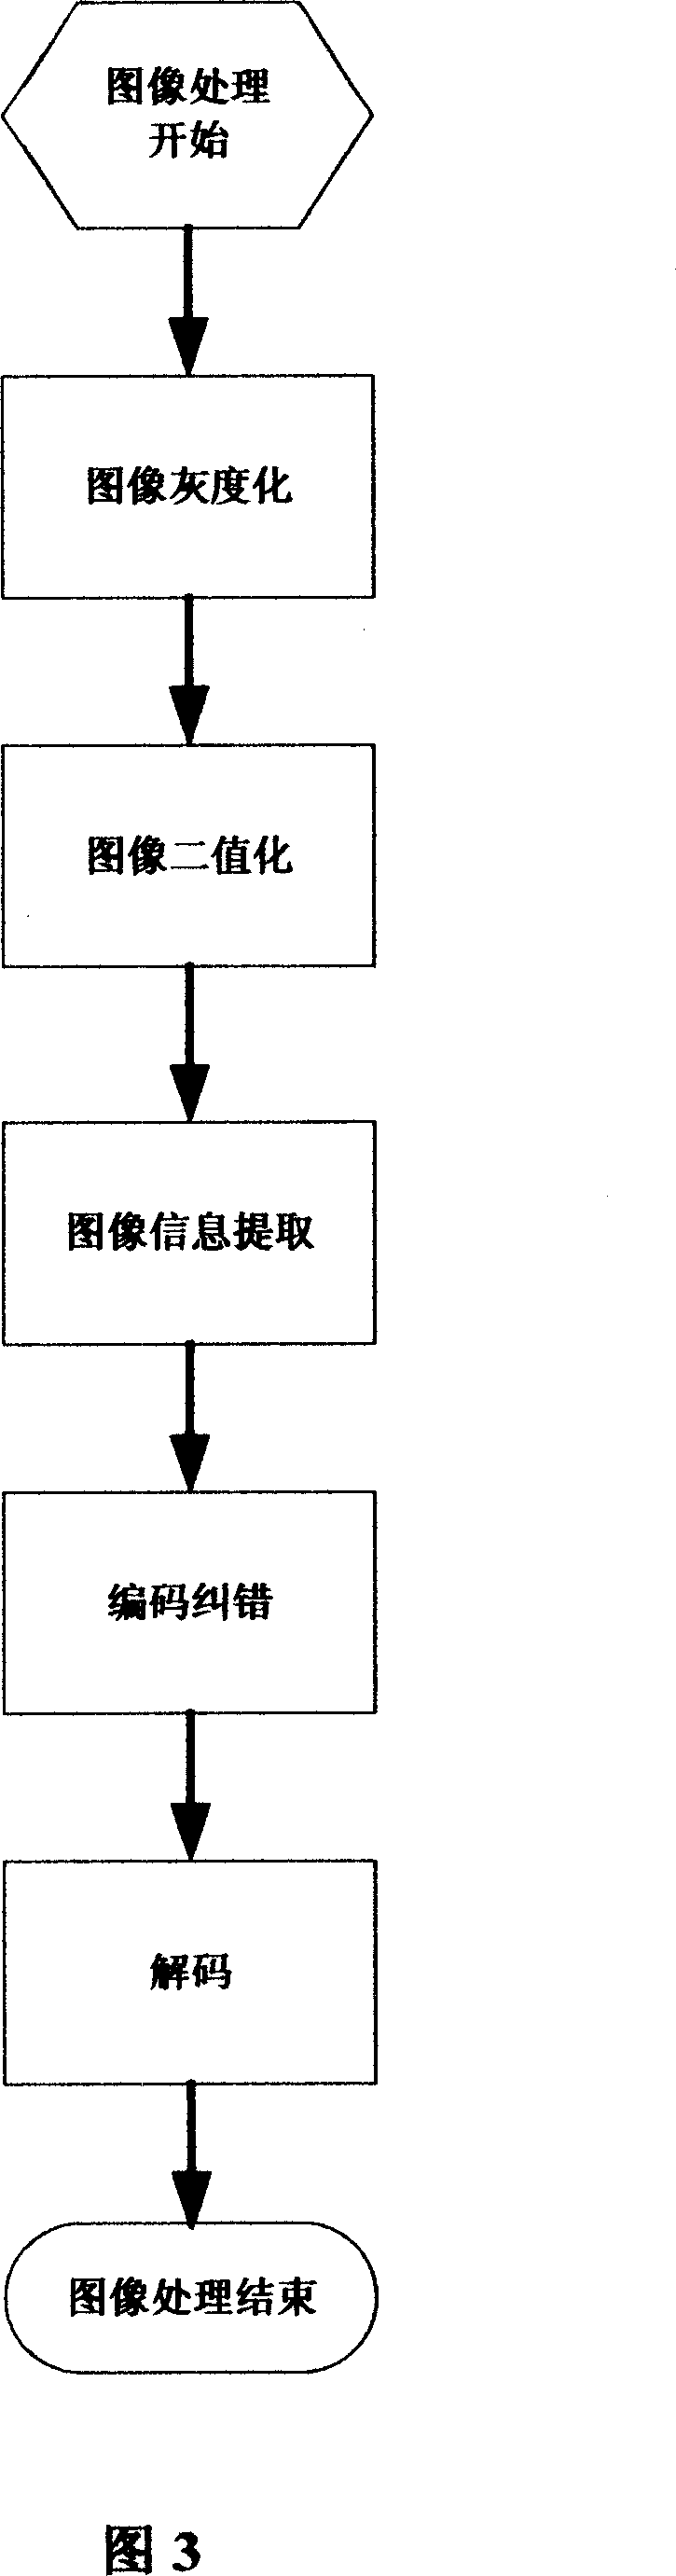 Method for realizing information interactive operation based on shootable mobile terminal